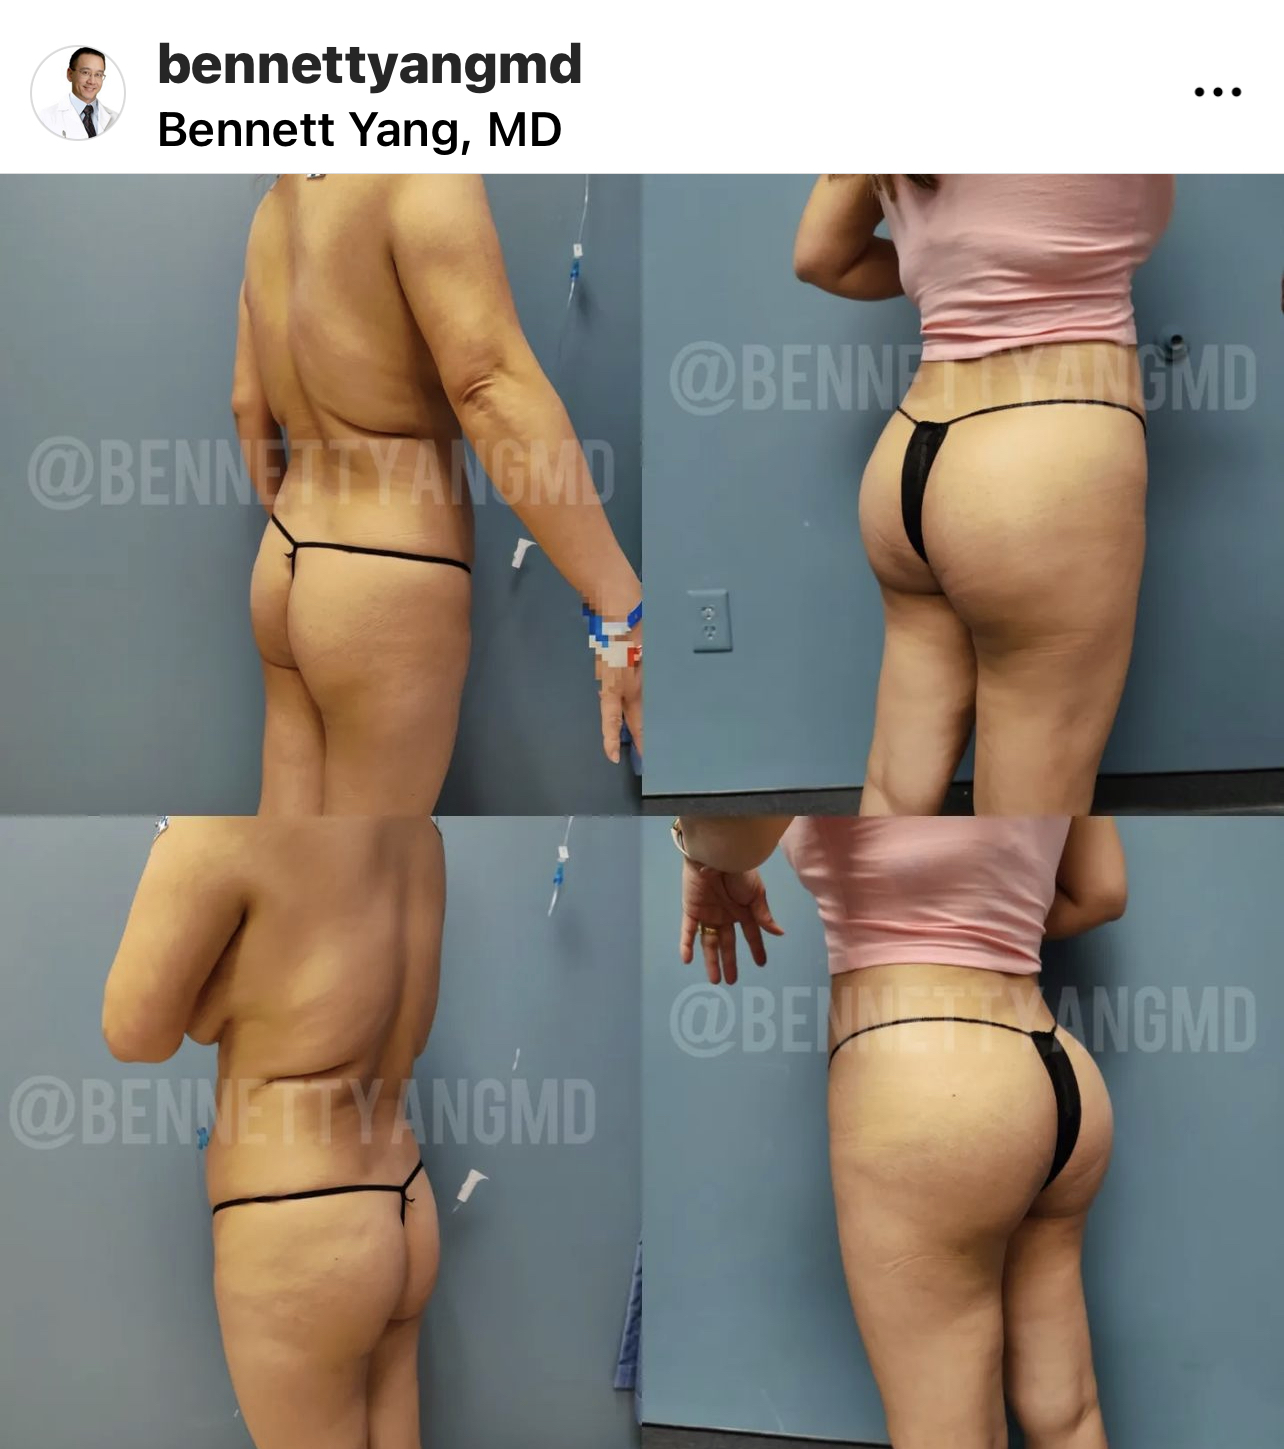 New Face MD - HD Lipo + BBL (Fat Transfer) What do you think of this  amazing transformation? 😷 Treatment: Liposuction + waist definition + BBL  🎯 Purpose: To reshape the body